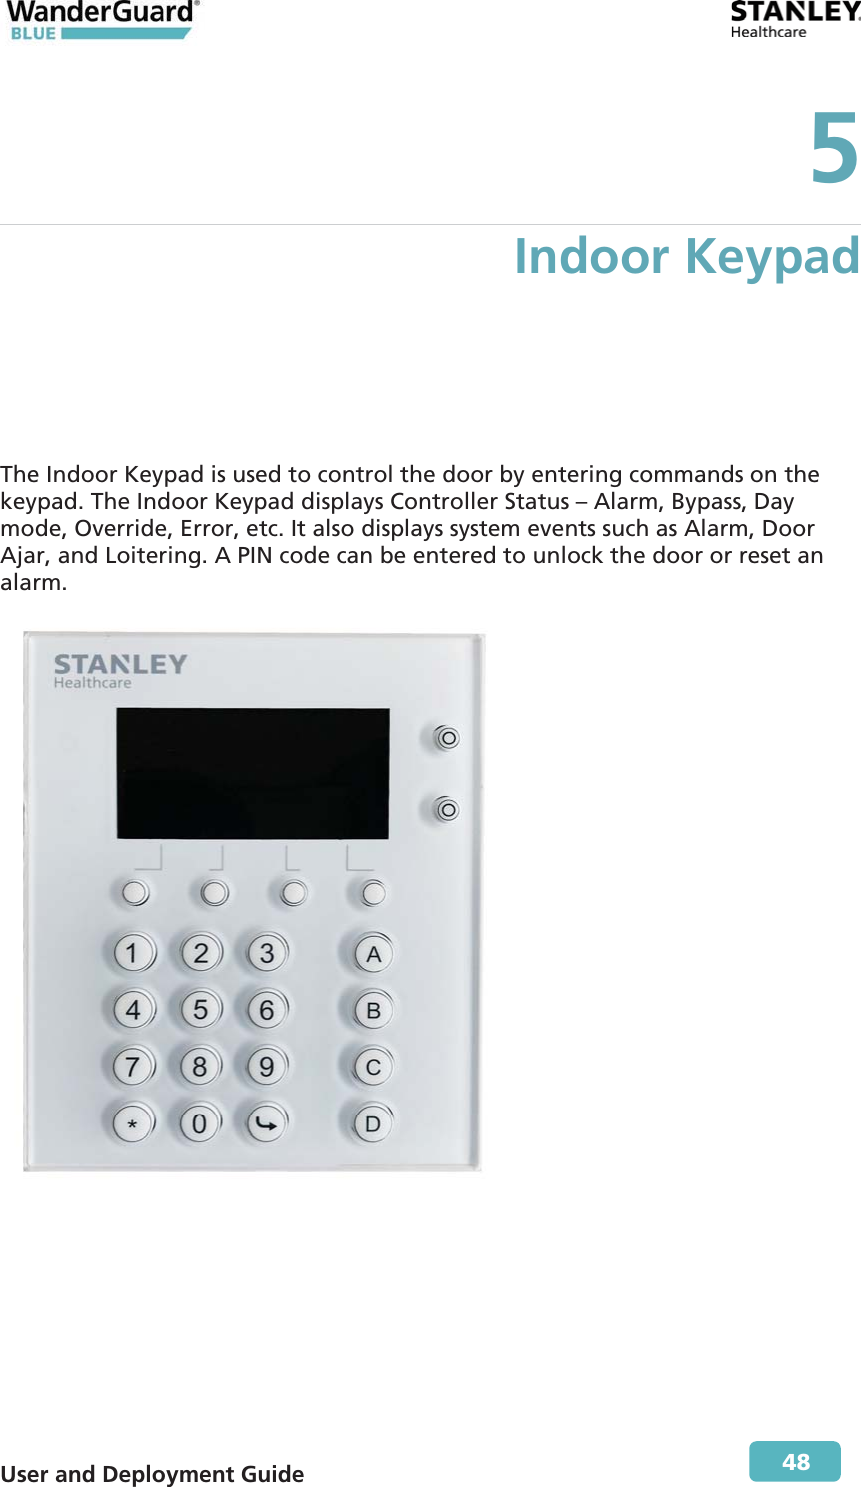  User and Deployment Guide        48 5 Indoor Keypad The Indoor Keypad is used to control the door by entering commands on the keypad. The Indoor Keypad displays Controller Status – Alarm, Bypass, Day mode, Override, Error, etc. It also displays system events such as Alarm, Door Ajar, and Loitering. A PIN code can be entered to unlock the door or reset an alarm.  